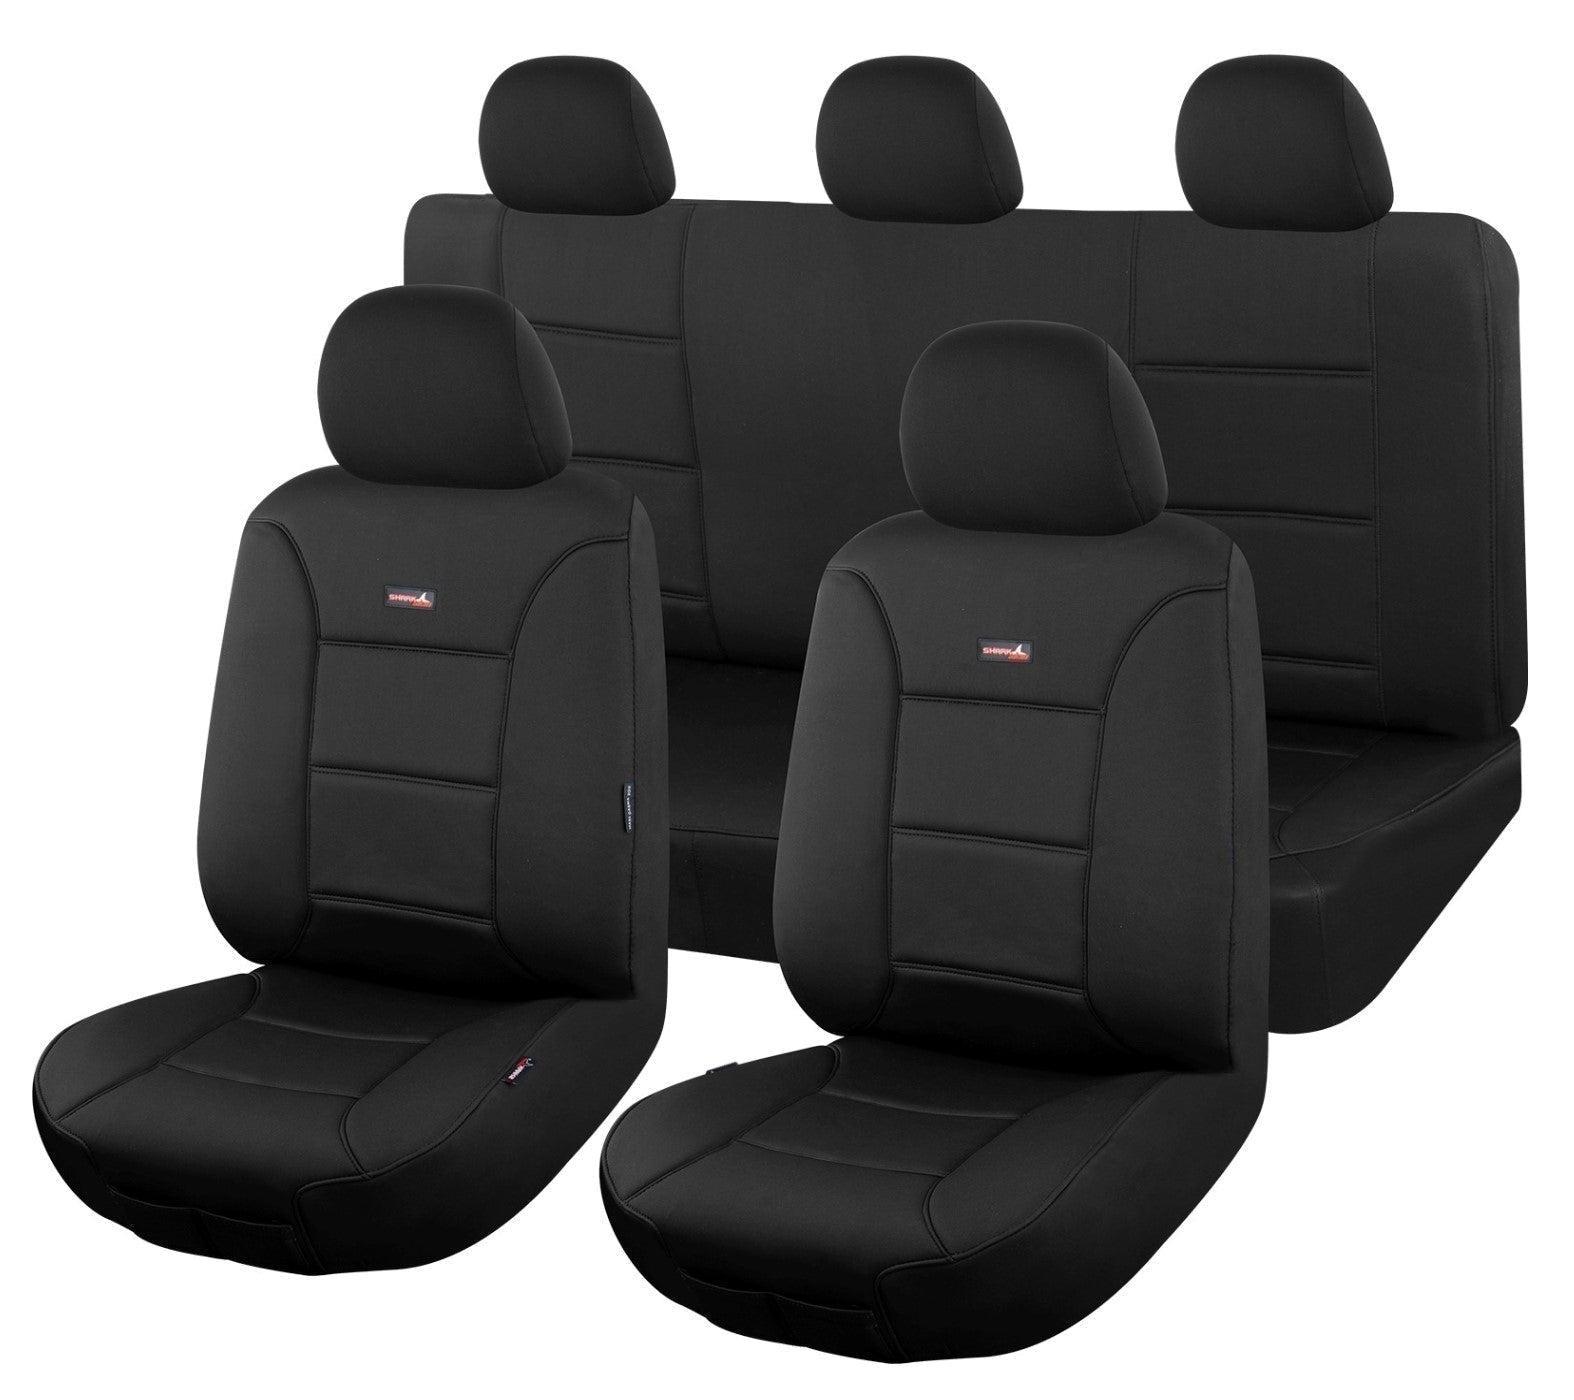 Sharkskin Plus Neoprene Seat Covers - For Ford Ranger PX/MKIII Series Dual Cab (07/2018-2022)